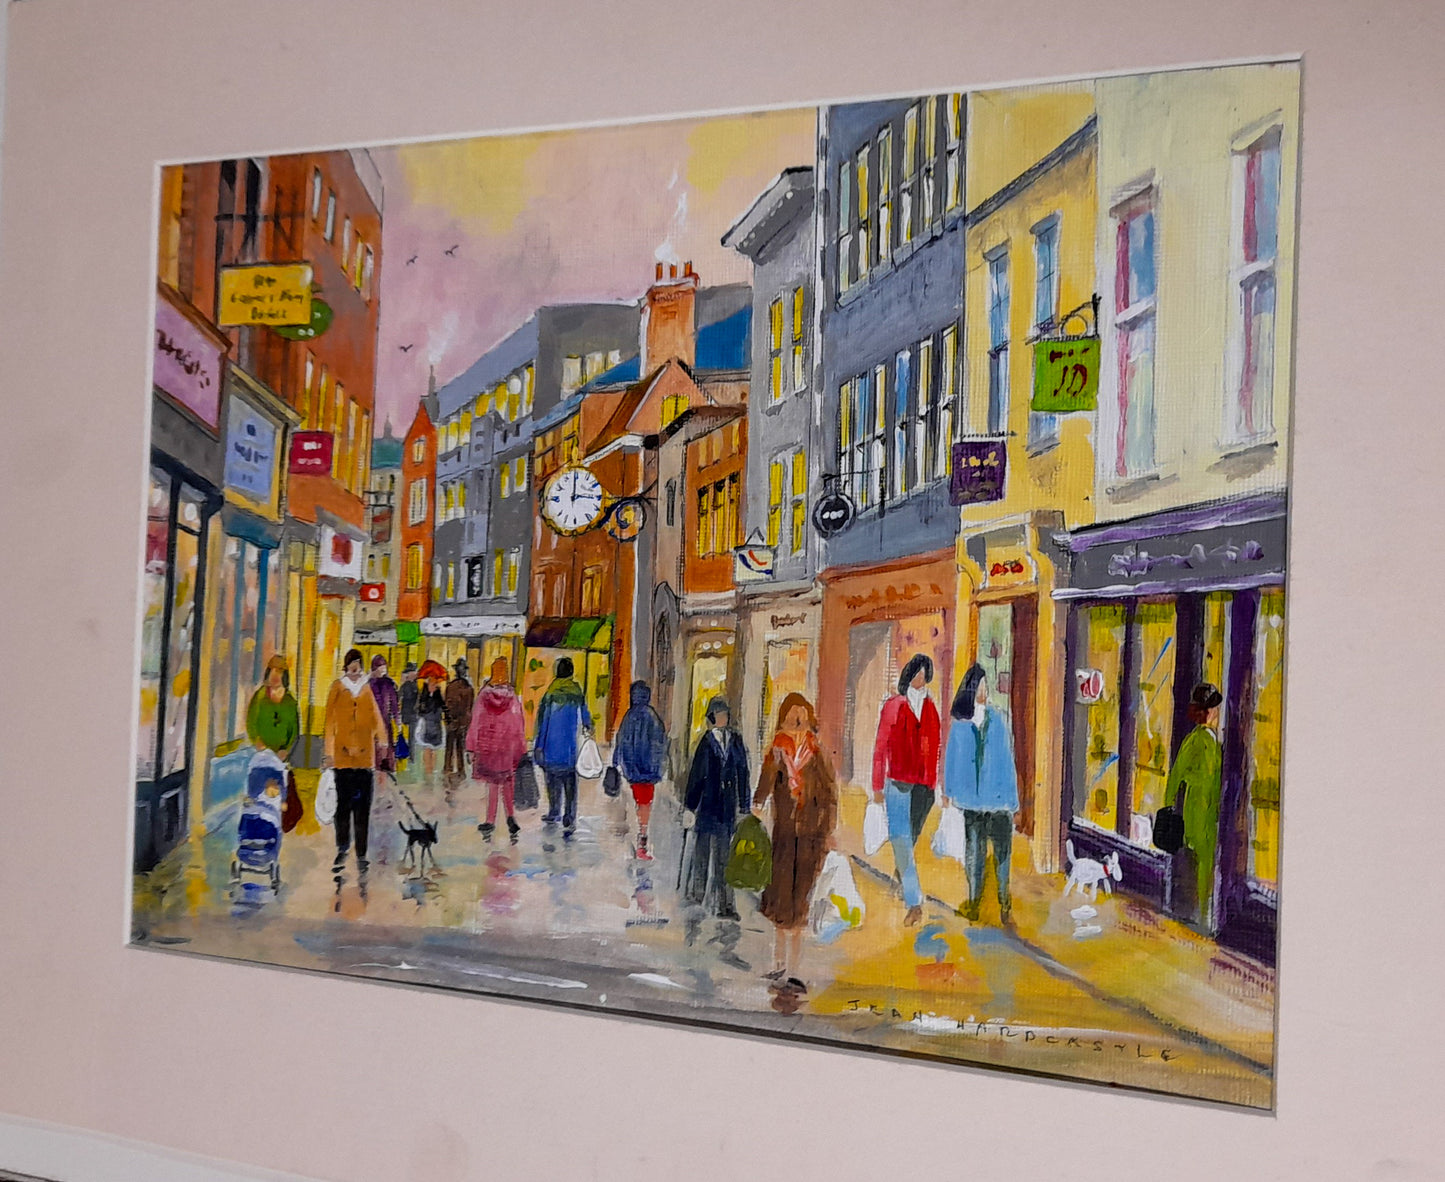 Coney St York - Original Water Colour Painting by Jean Hardcastle